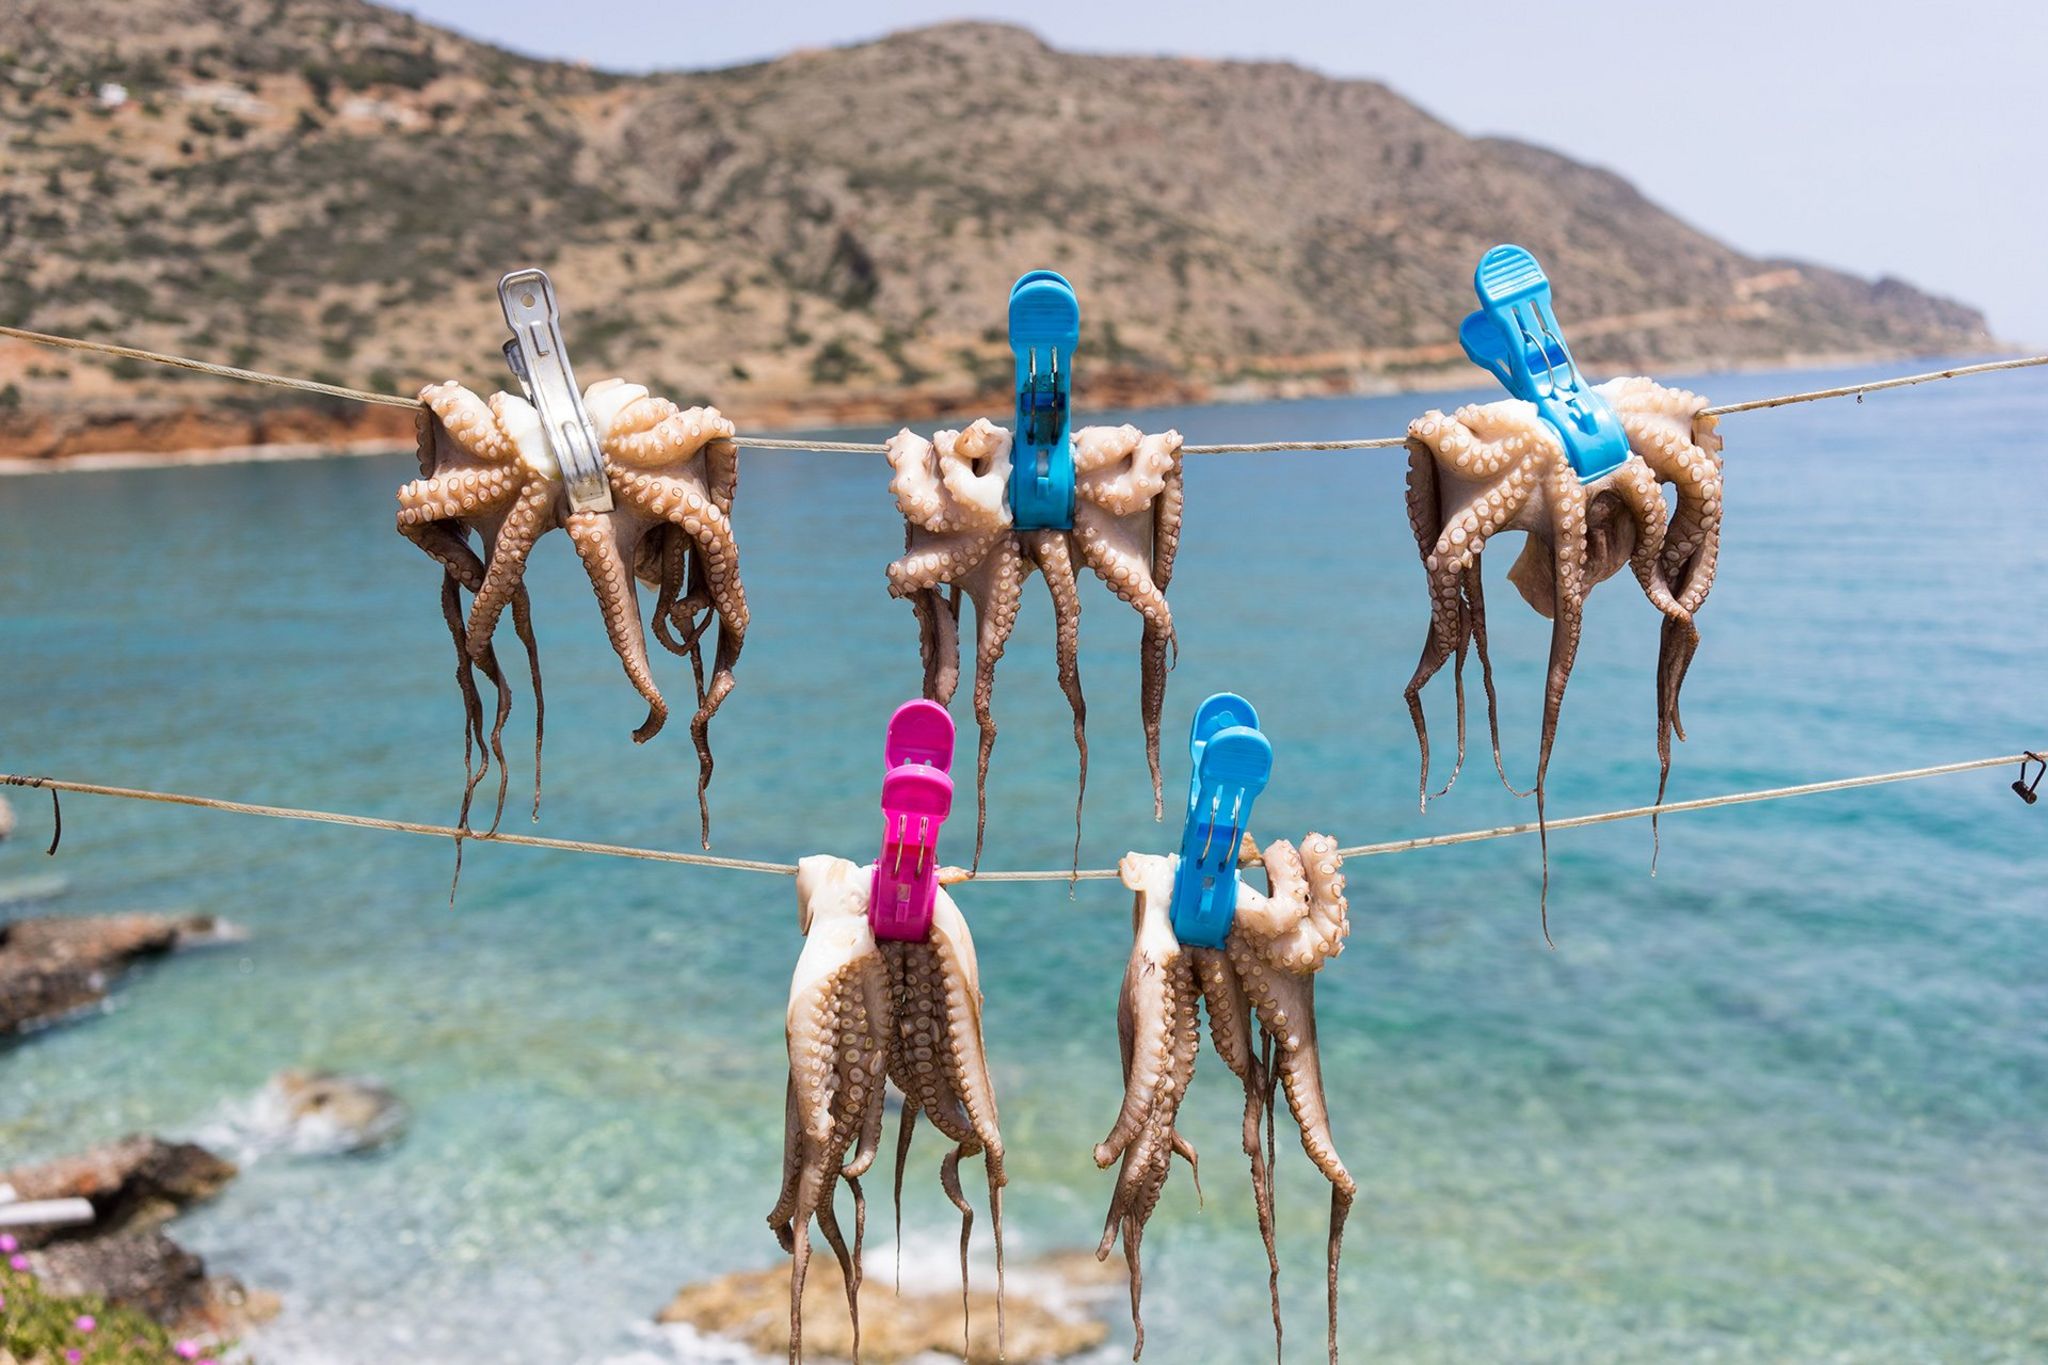 Octopuses drying on a line